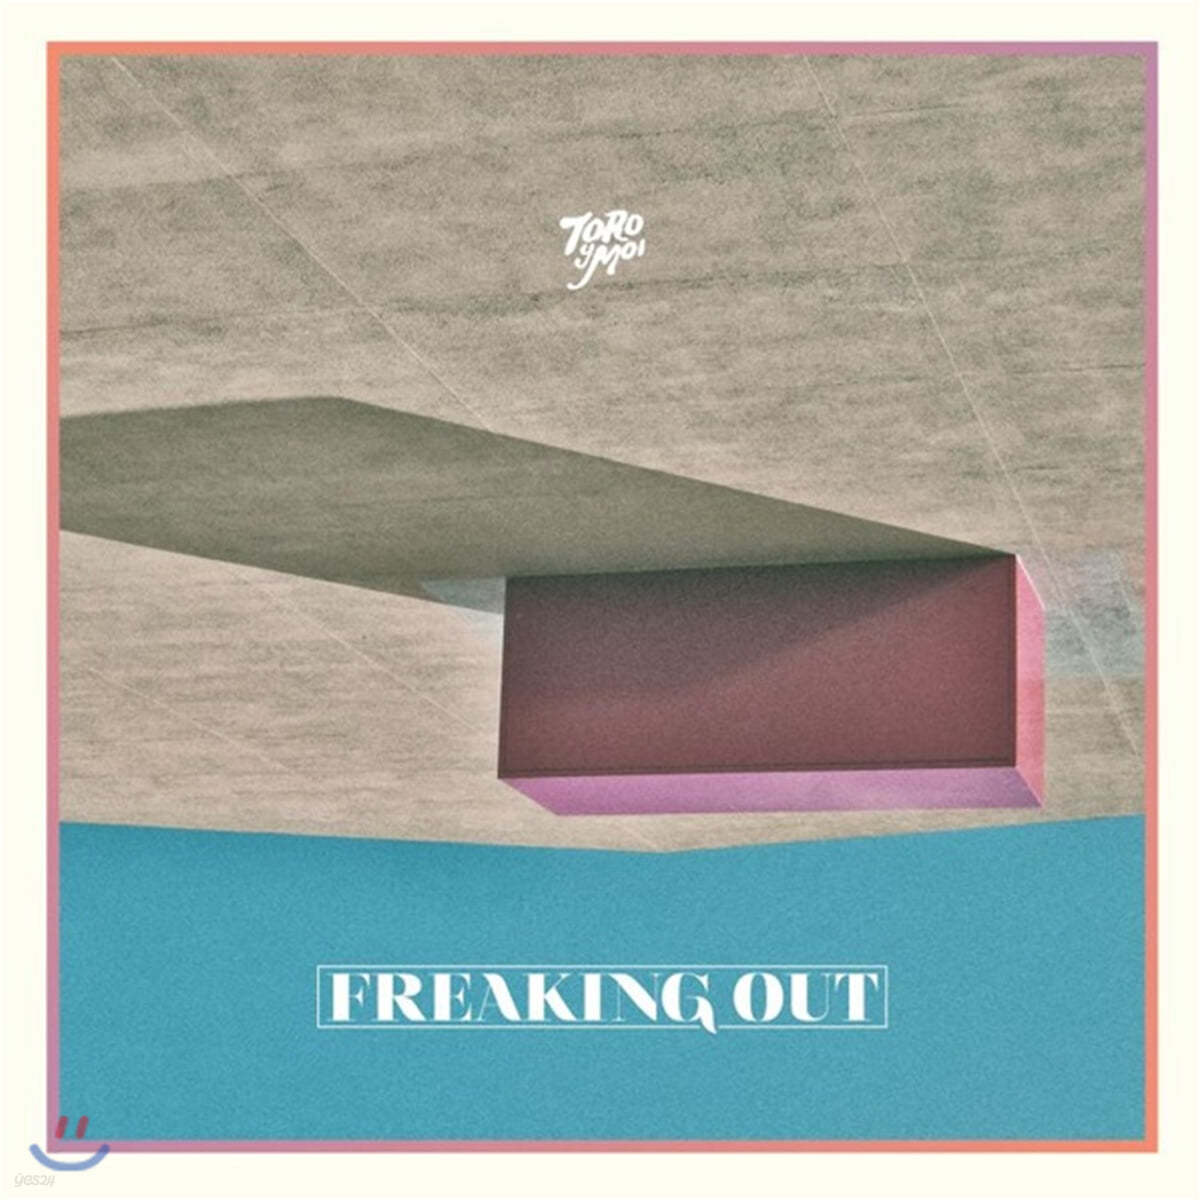 Toro Y Moi (토로 이 므와) - Freaking Out (EP) 